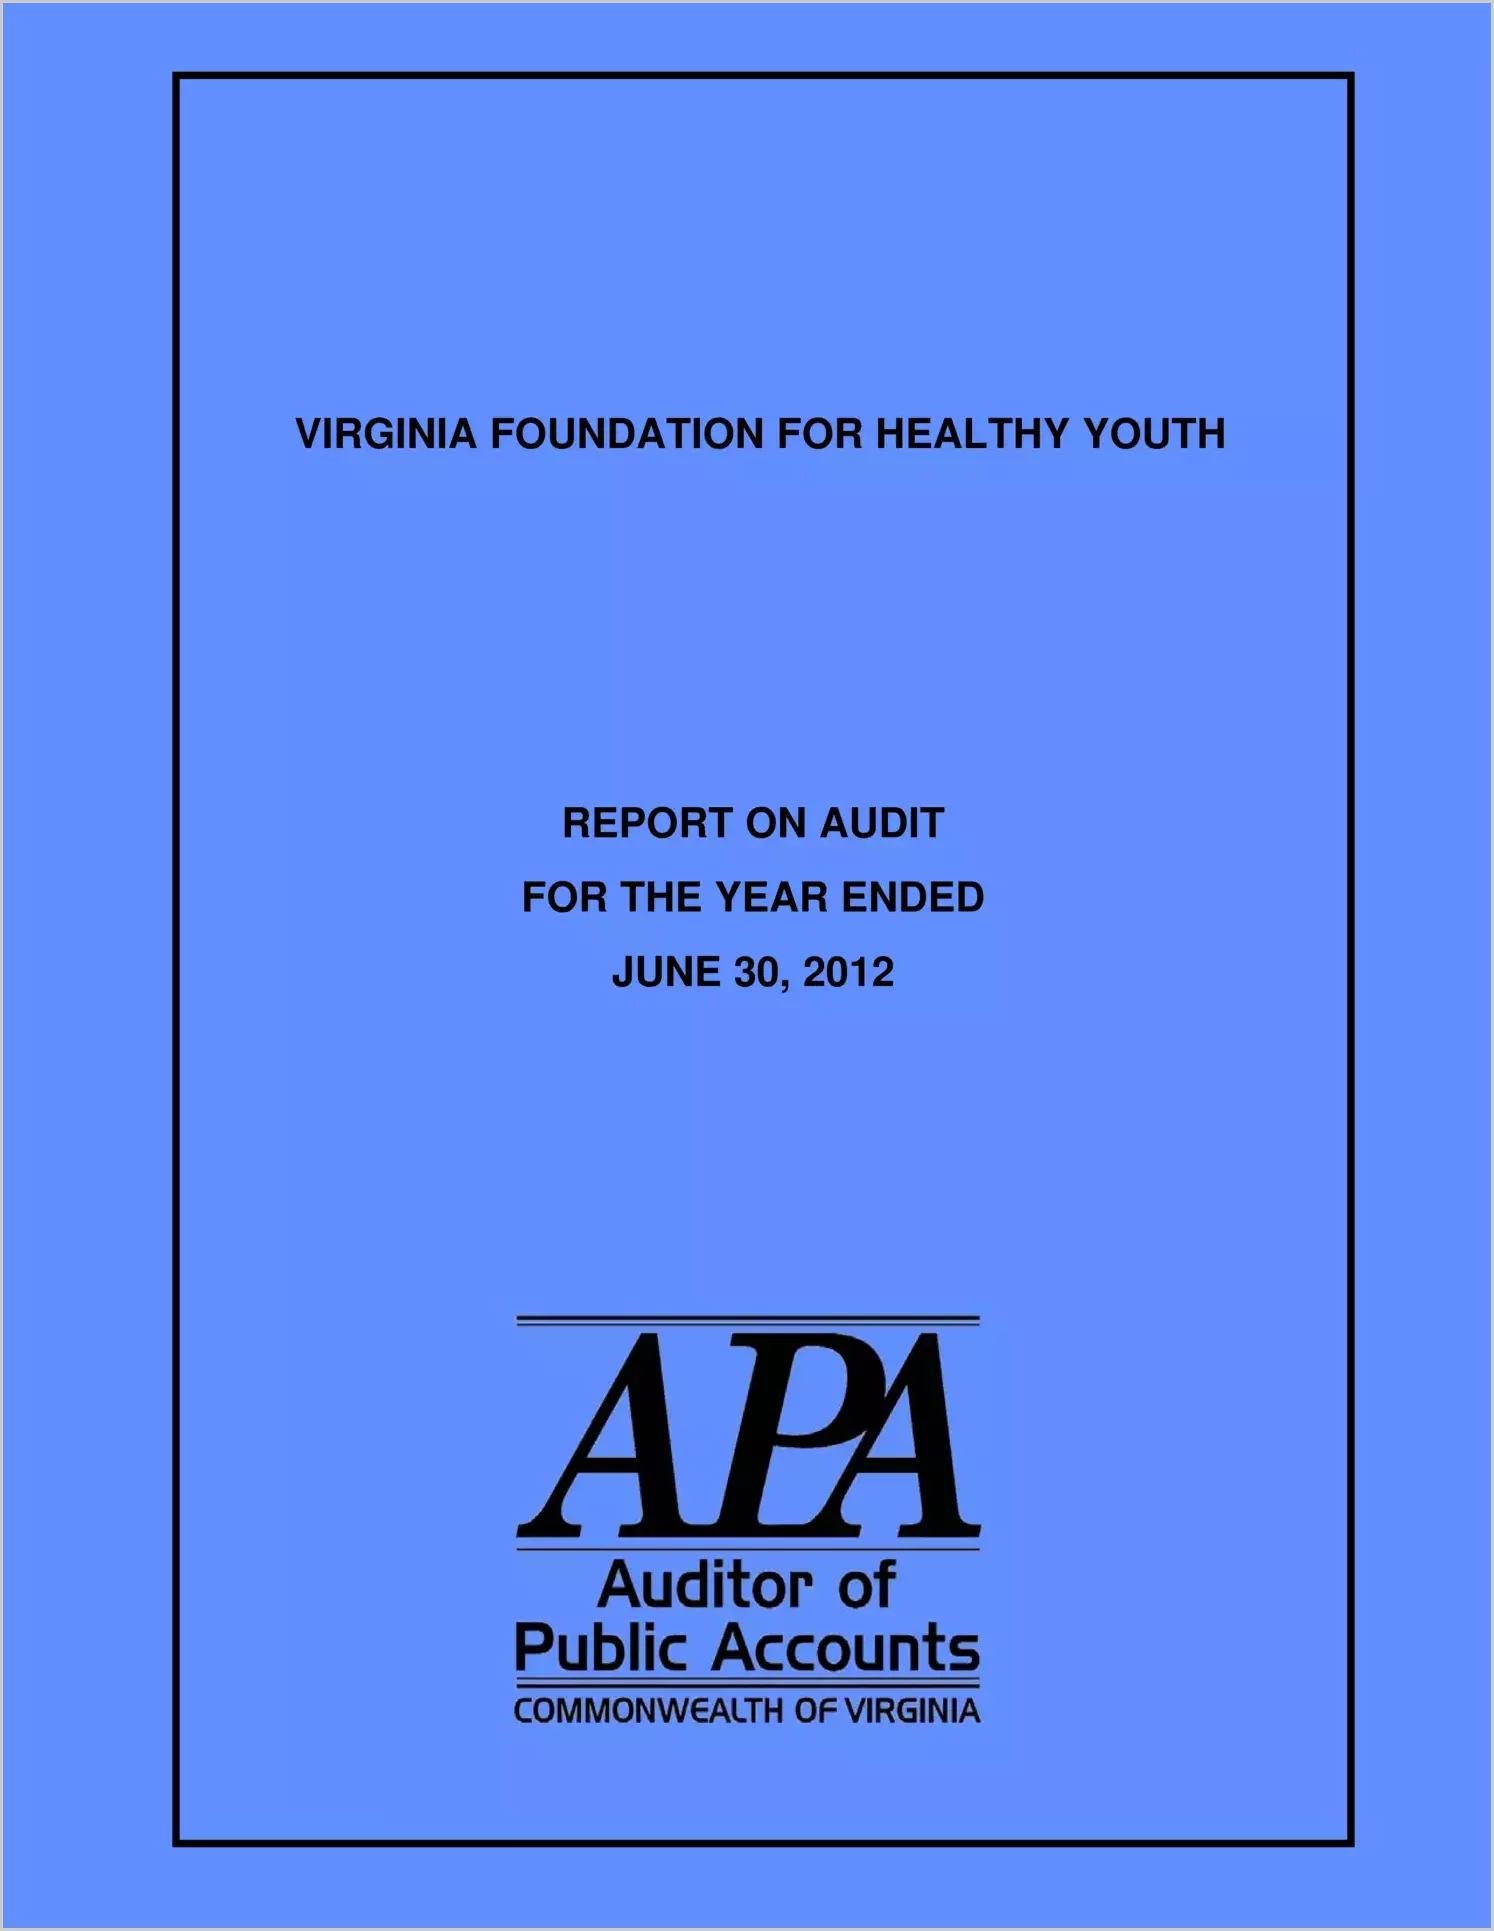 Foundation for Healthy Youth for the year ended June 30, 2012